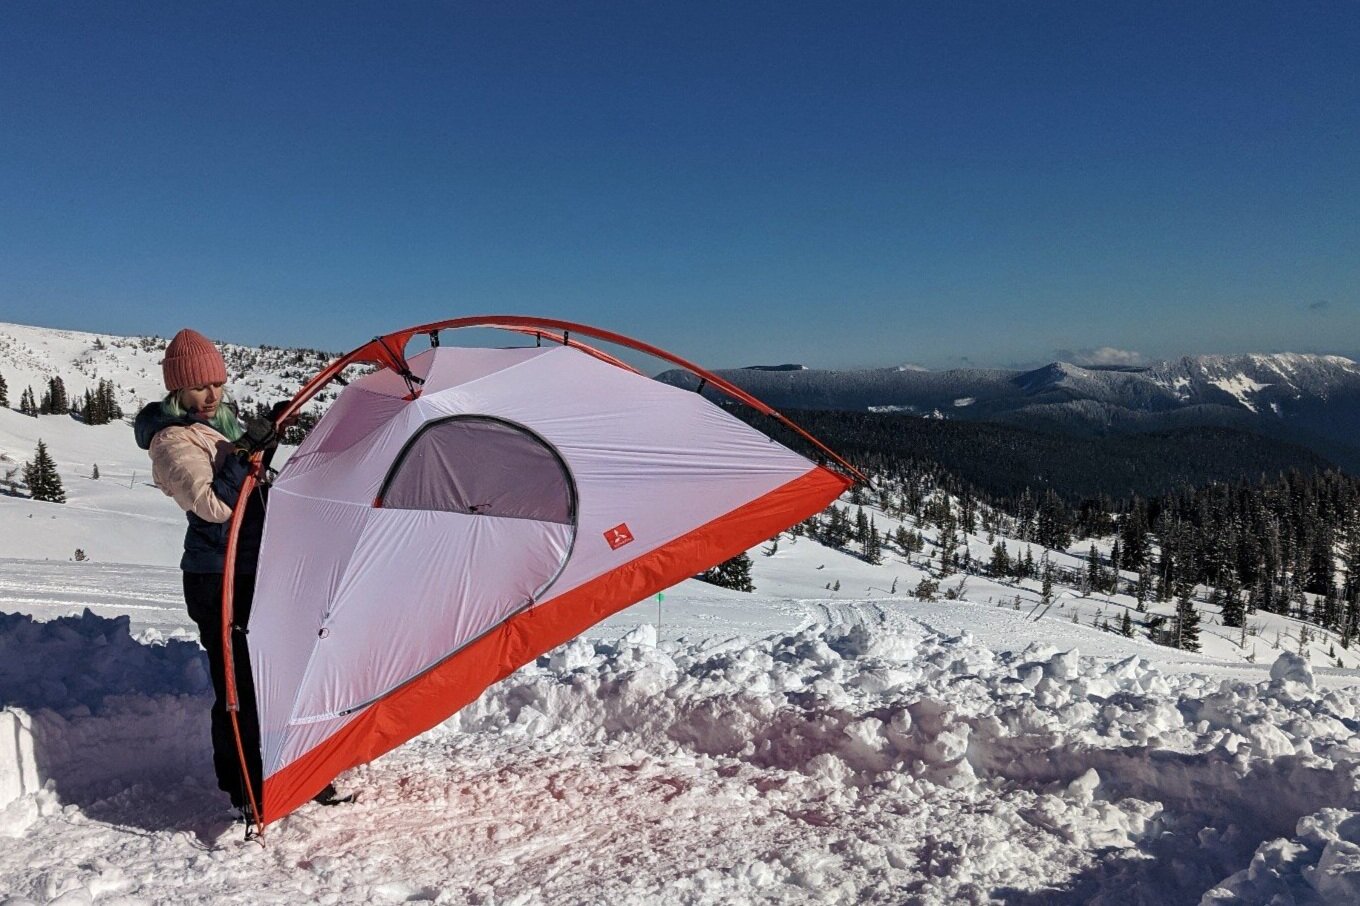 A hiker placing the Slingfin Crossbow 4-season tent in a dug out snow campsite